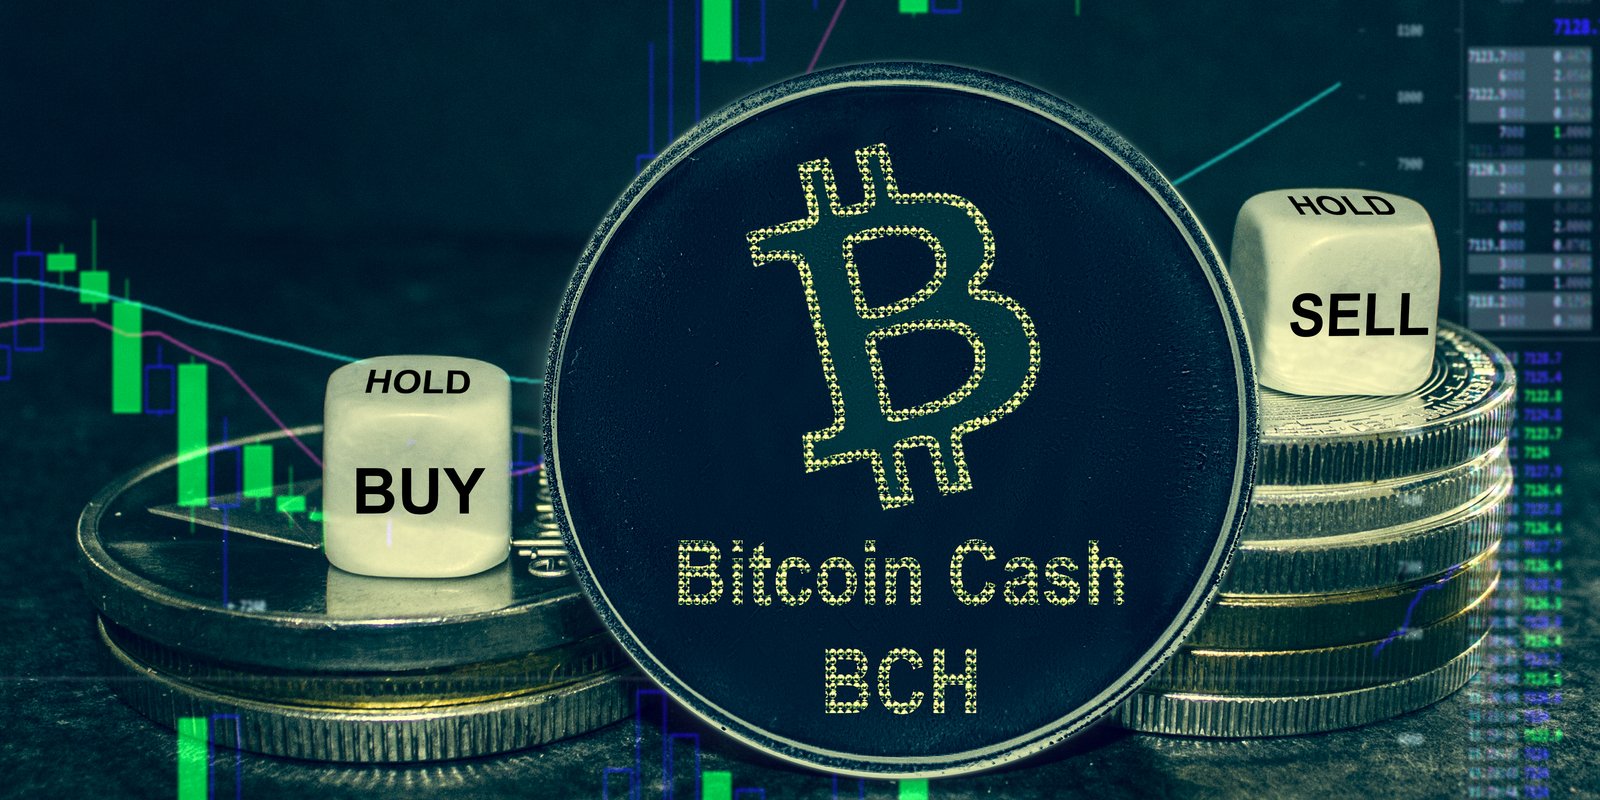 Btc bch exchange cryptocurrency capital asset